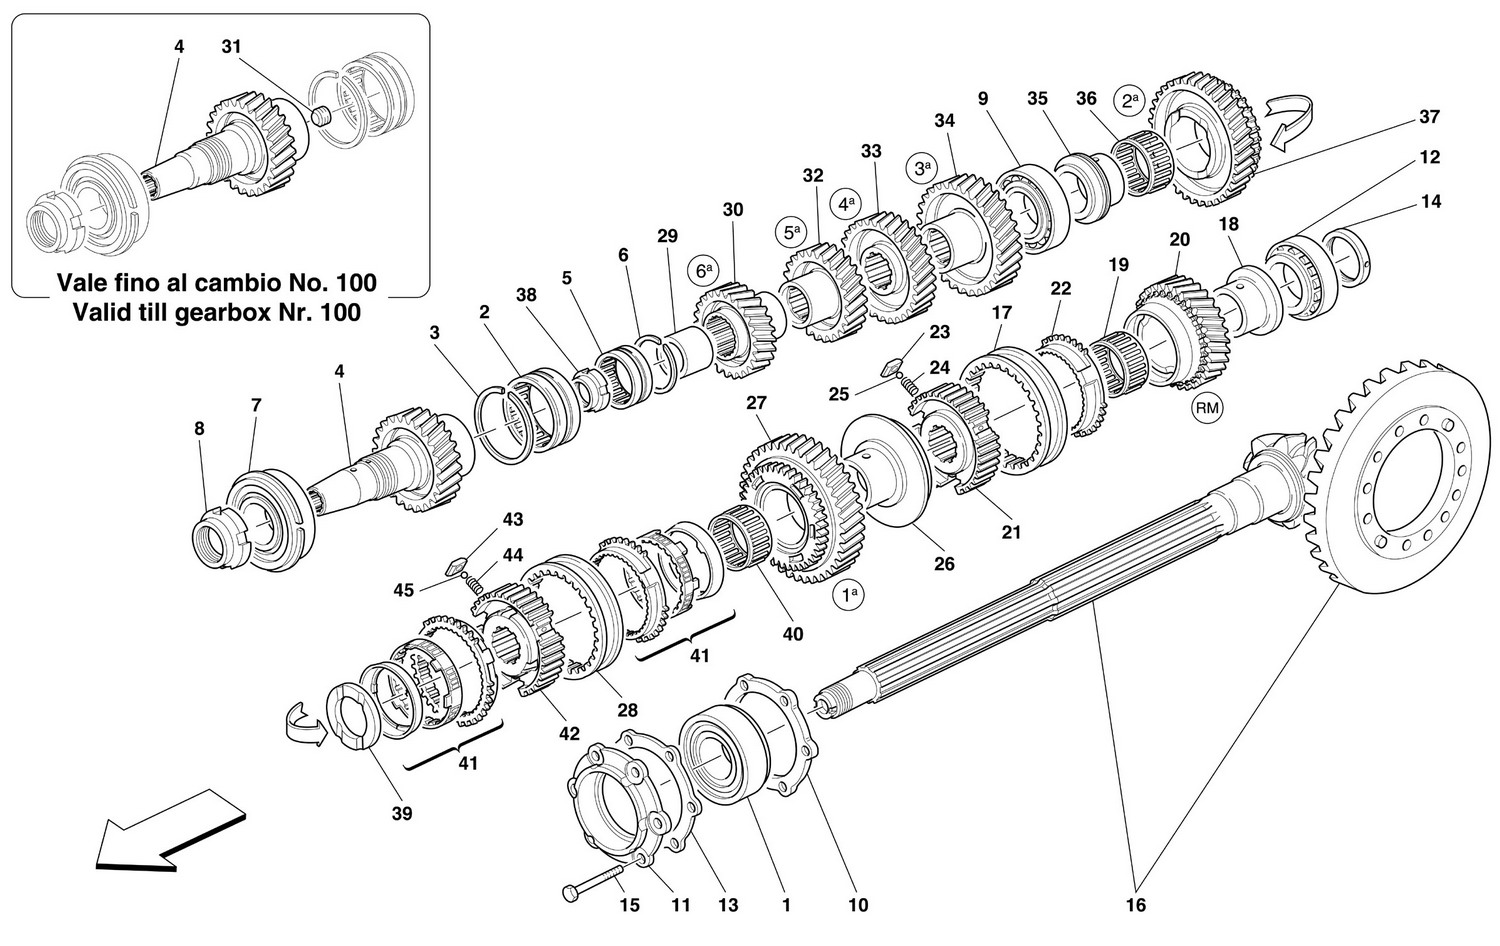 Schematic: Lay Shaft Gears -Not For 456M Gta